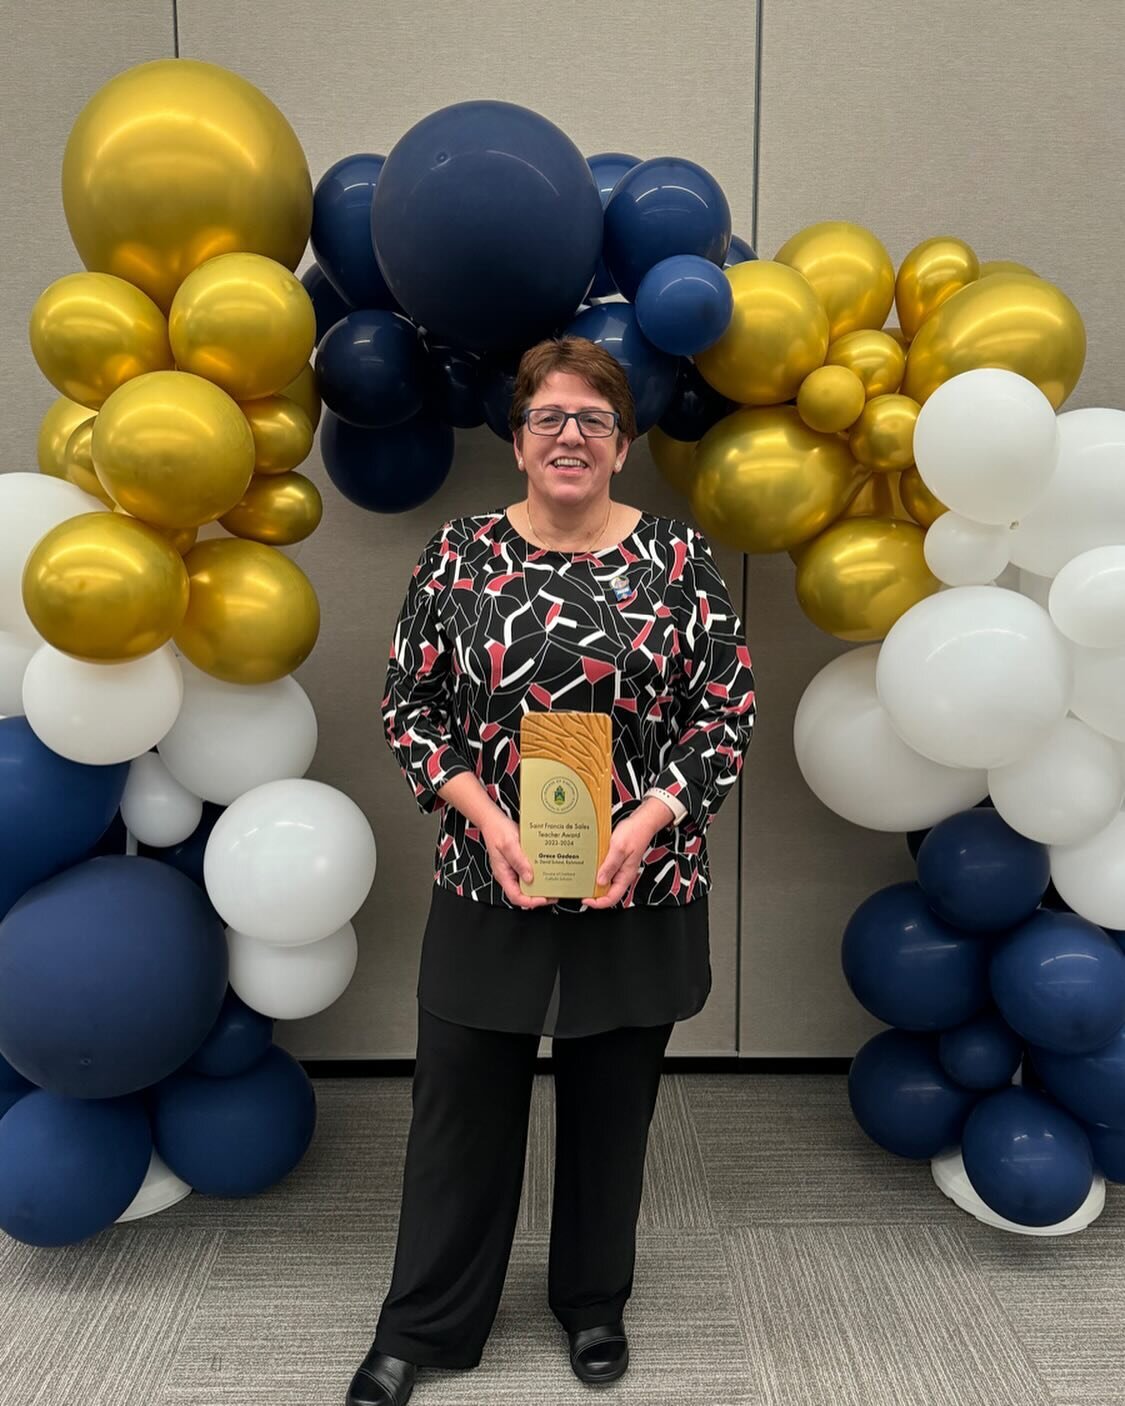 Congratulations to our beloved Vice principal Mrs. Gedeon for earning the Saint Francis de Sales award for her dedication in Catholic Education. Your community loves you Mrs. Gedeon!